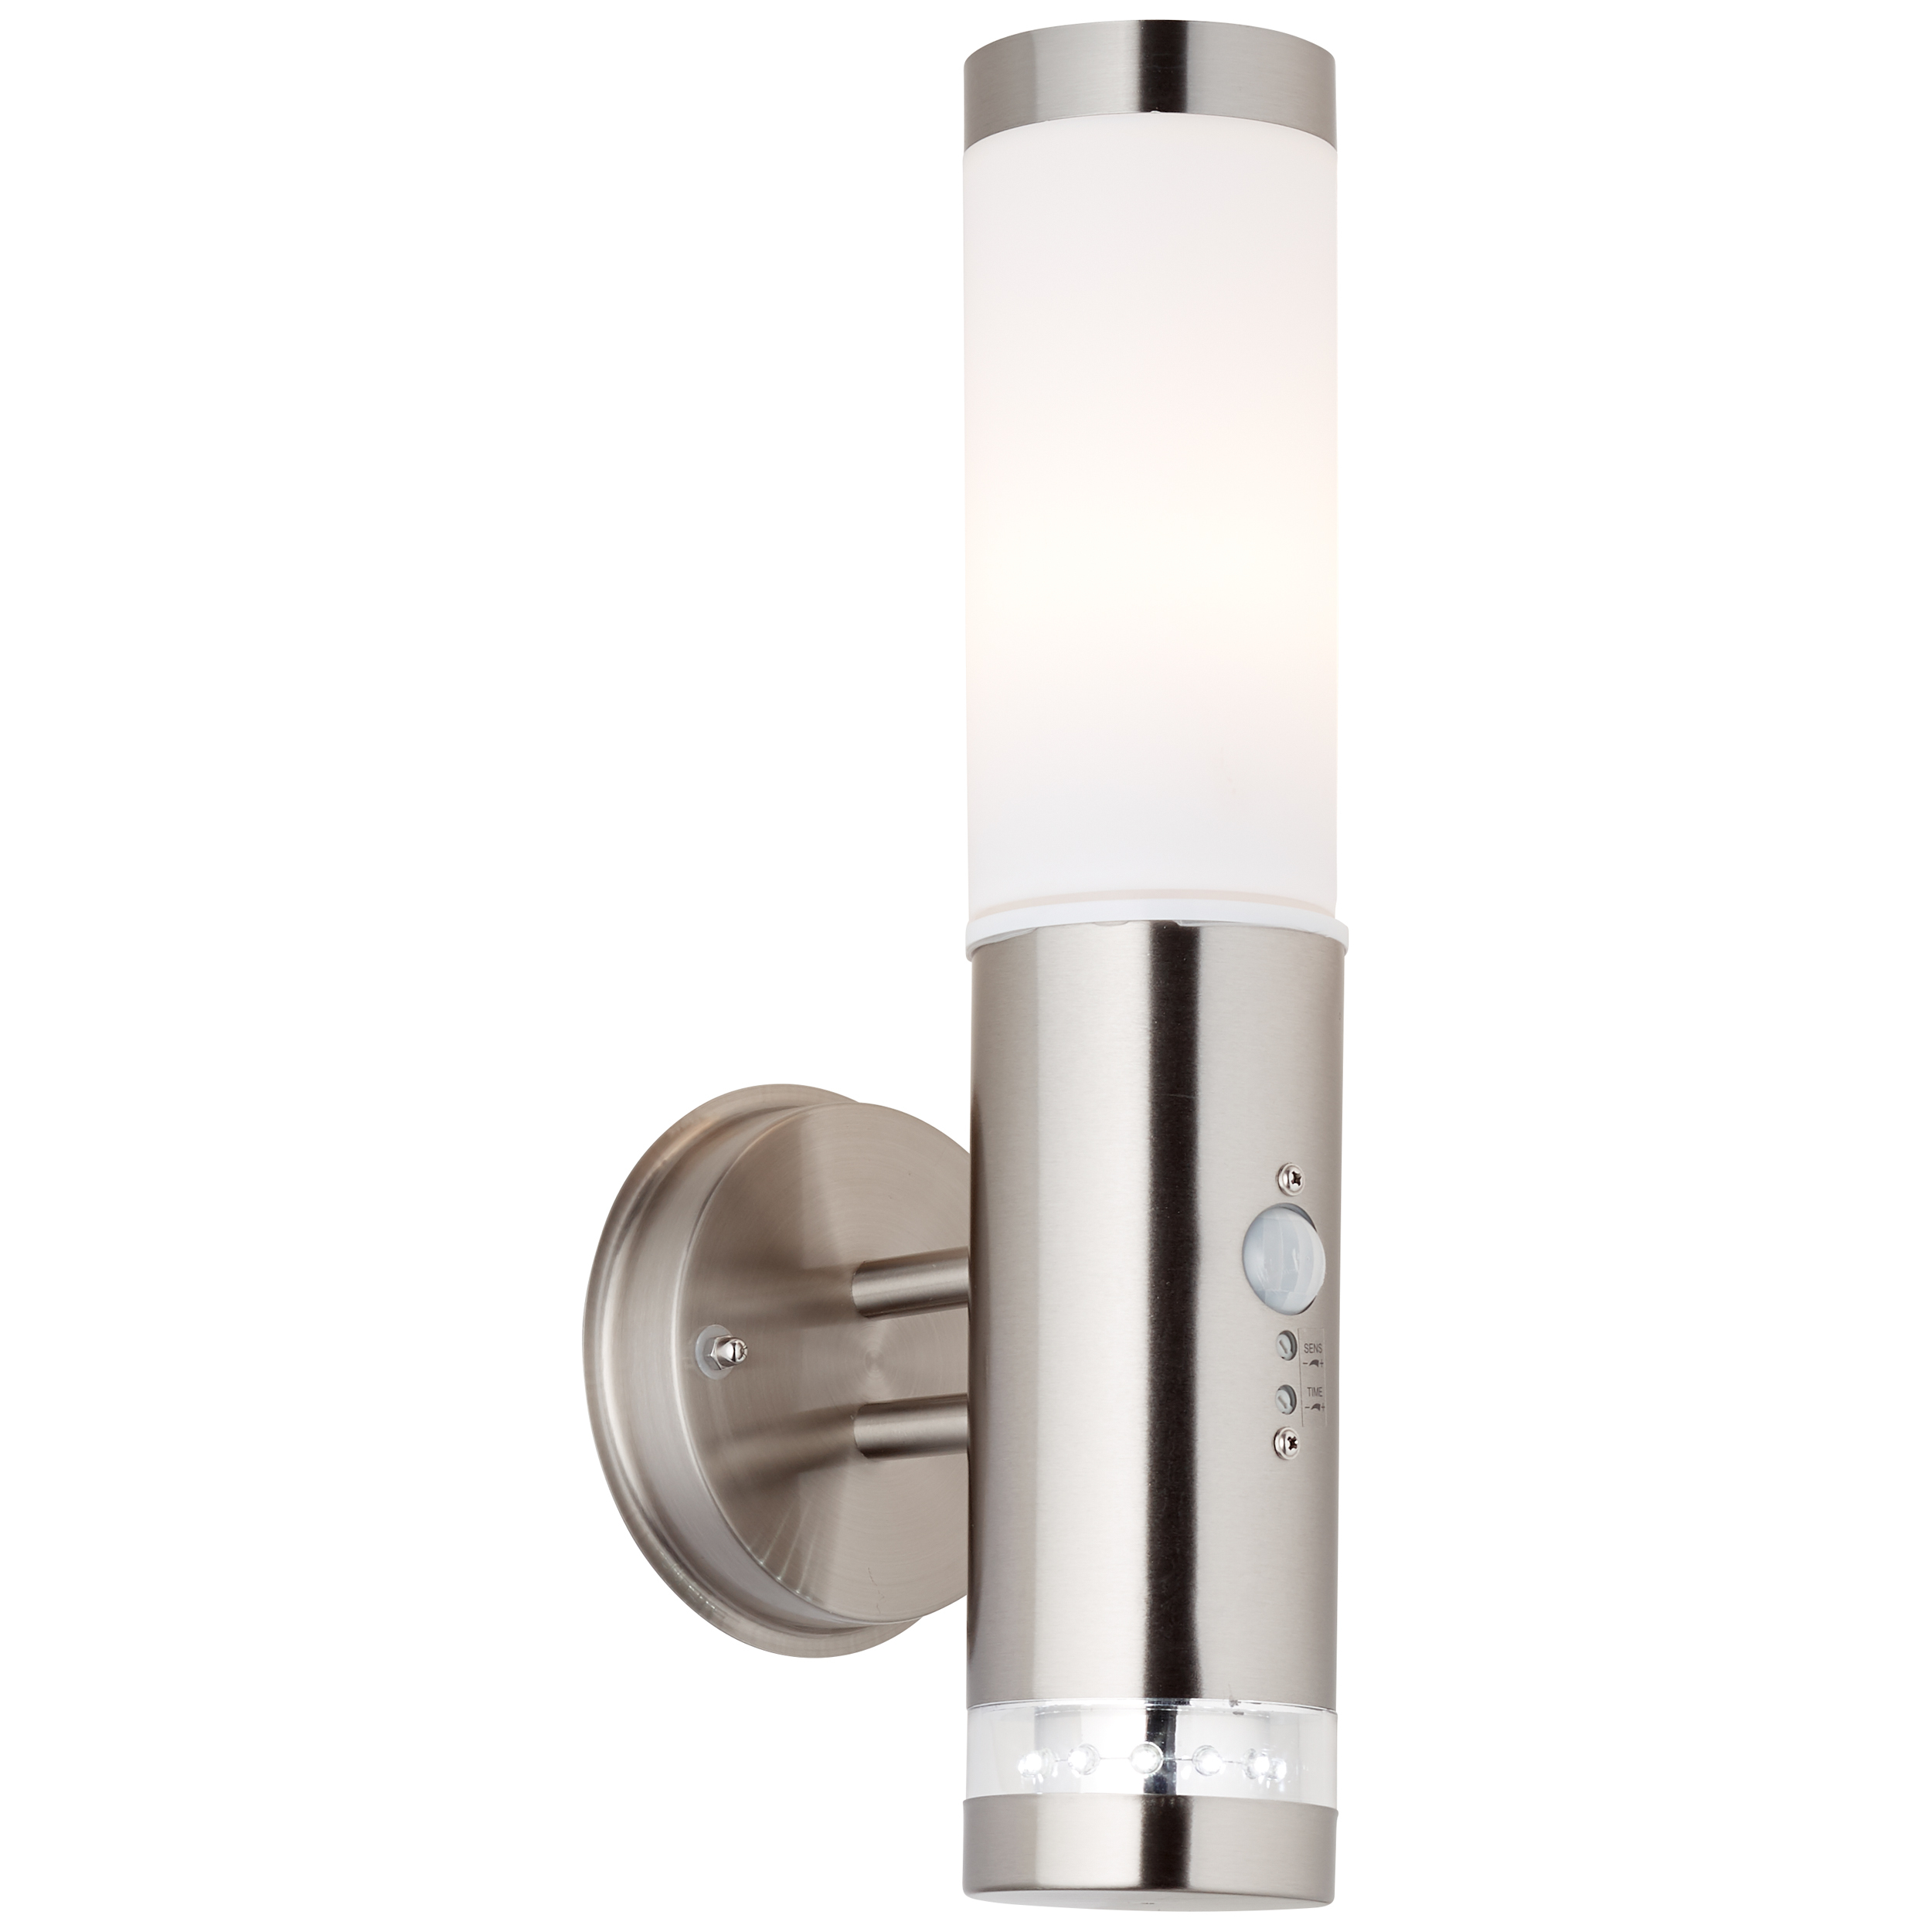 Bole outdoor wall light standing motion detector stainless steel